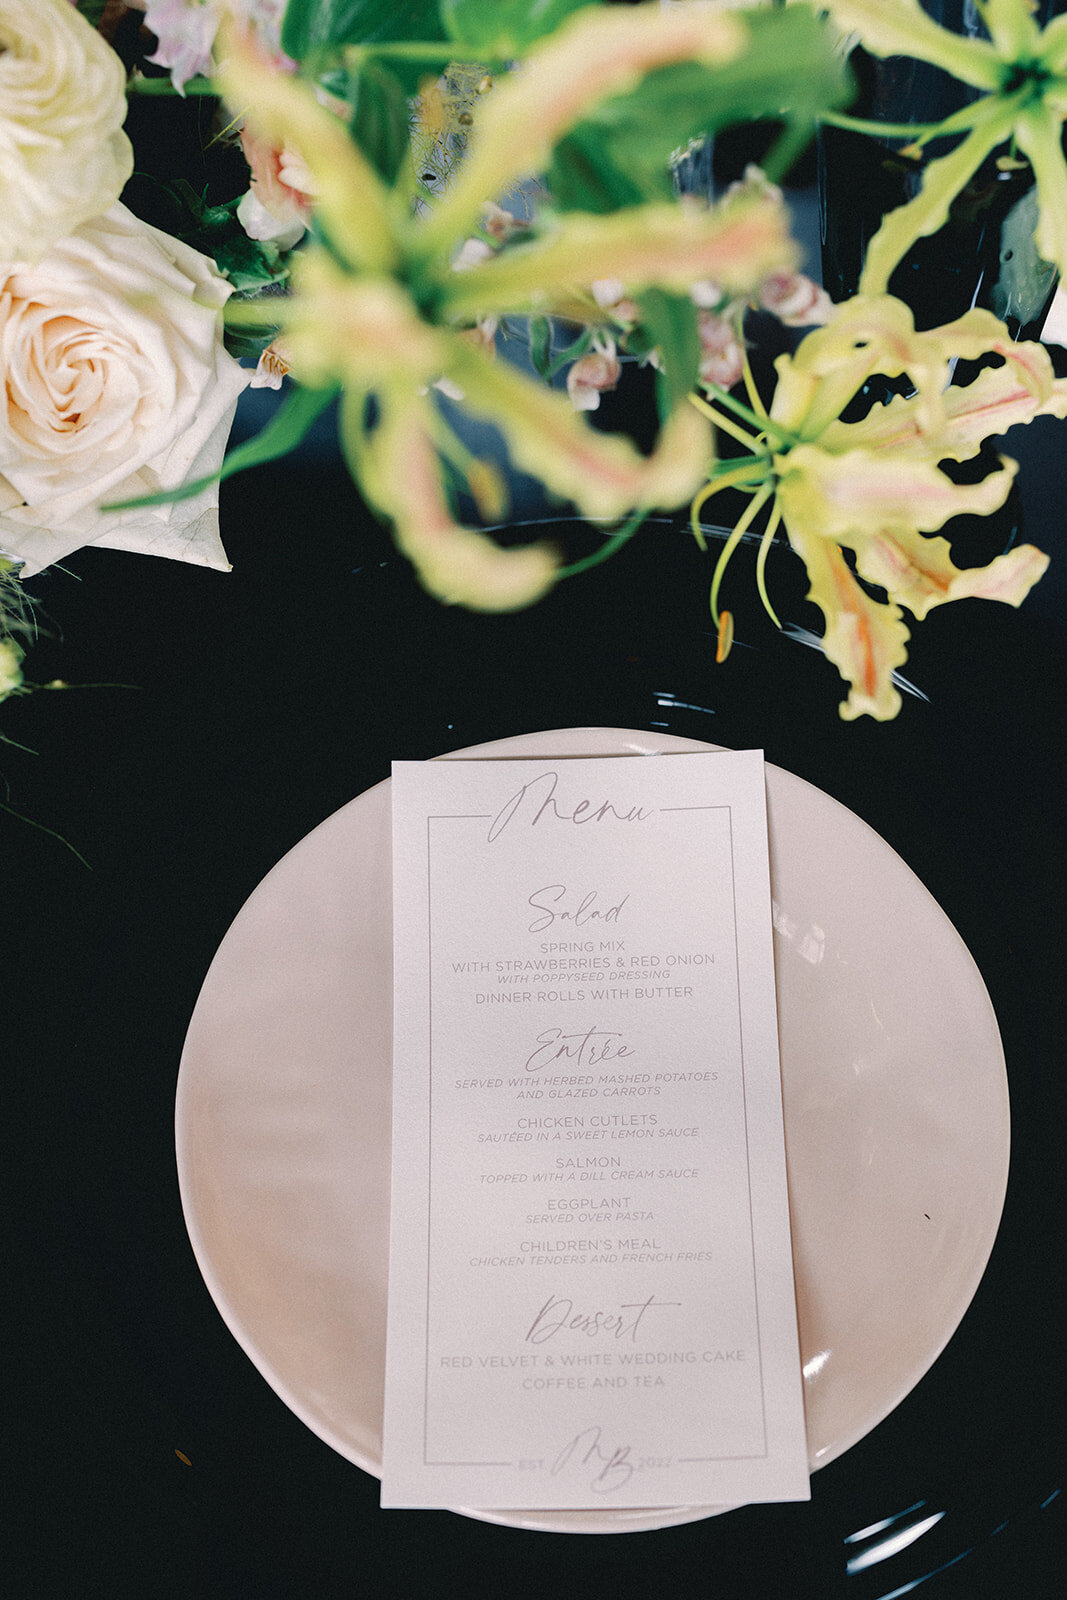 Table setting with a menu on a plate on a black table